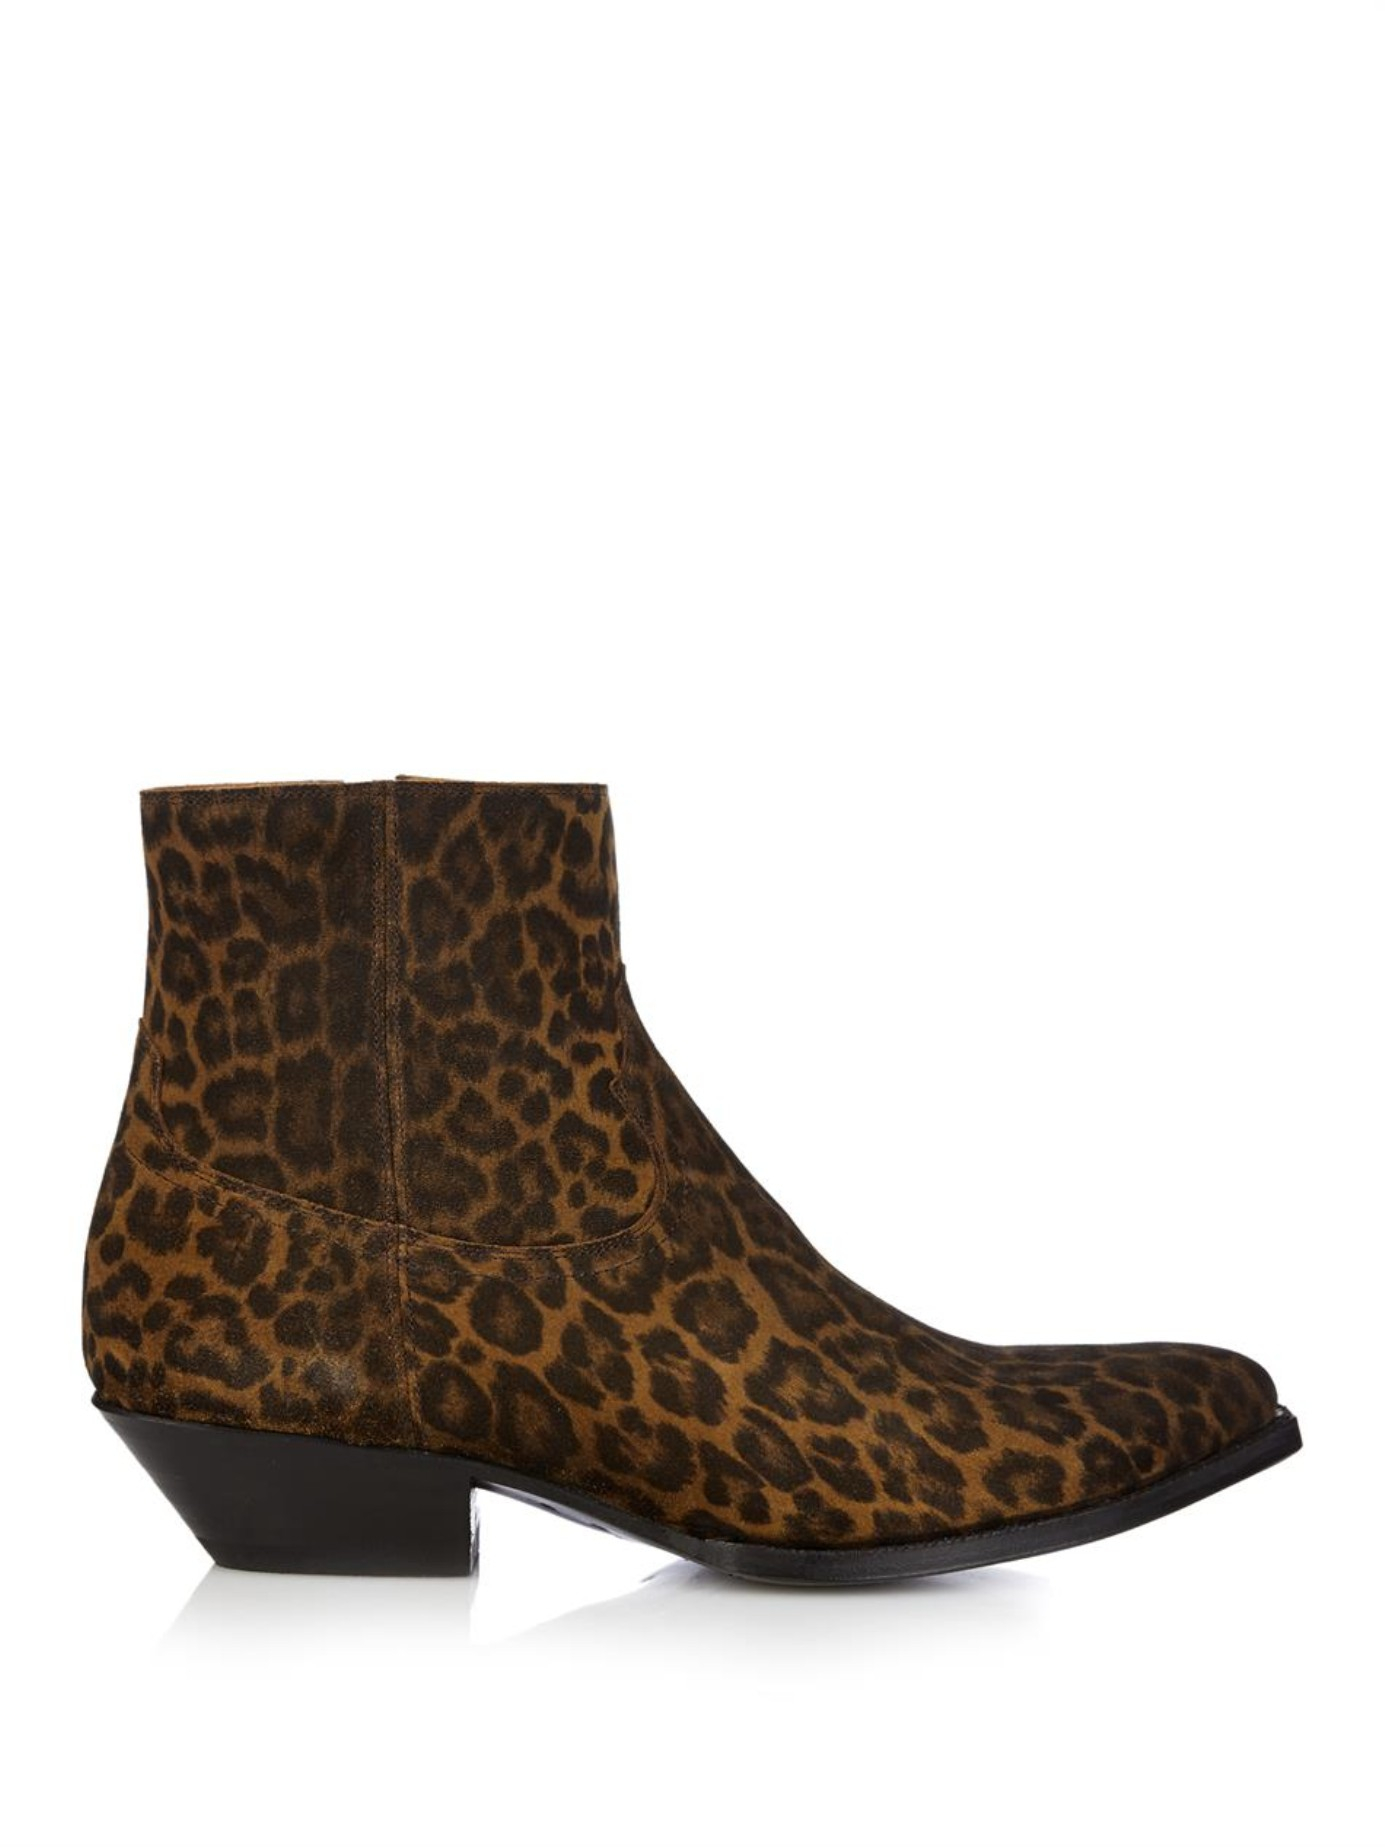 Saint Laurent Leopard-Print Suede Ankle Boots in Brown for Men | Lyst